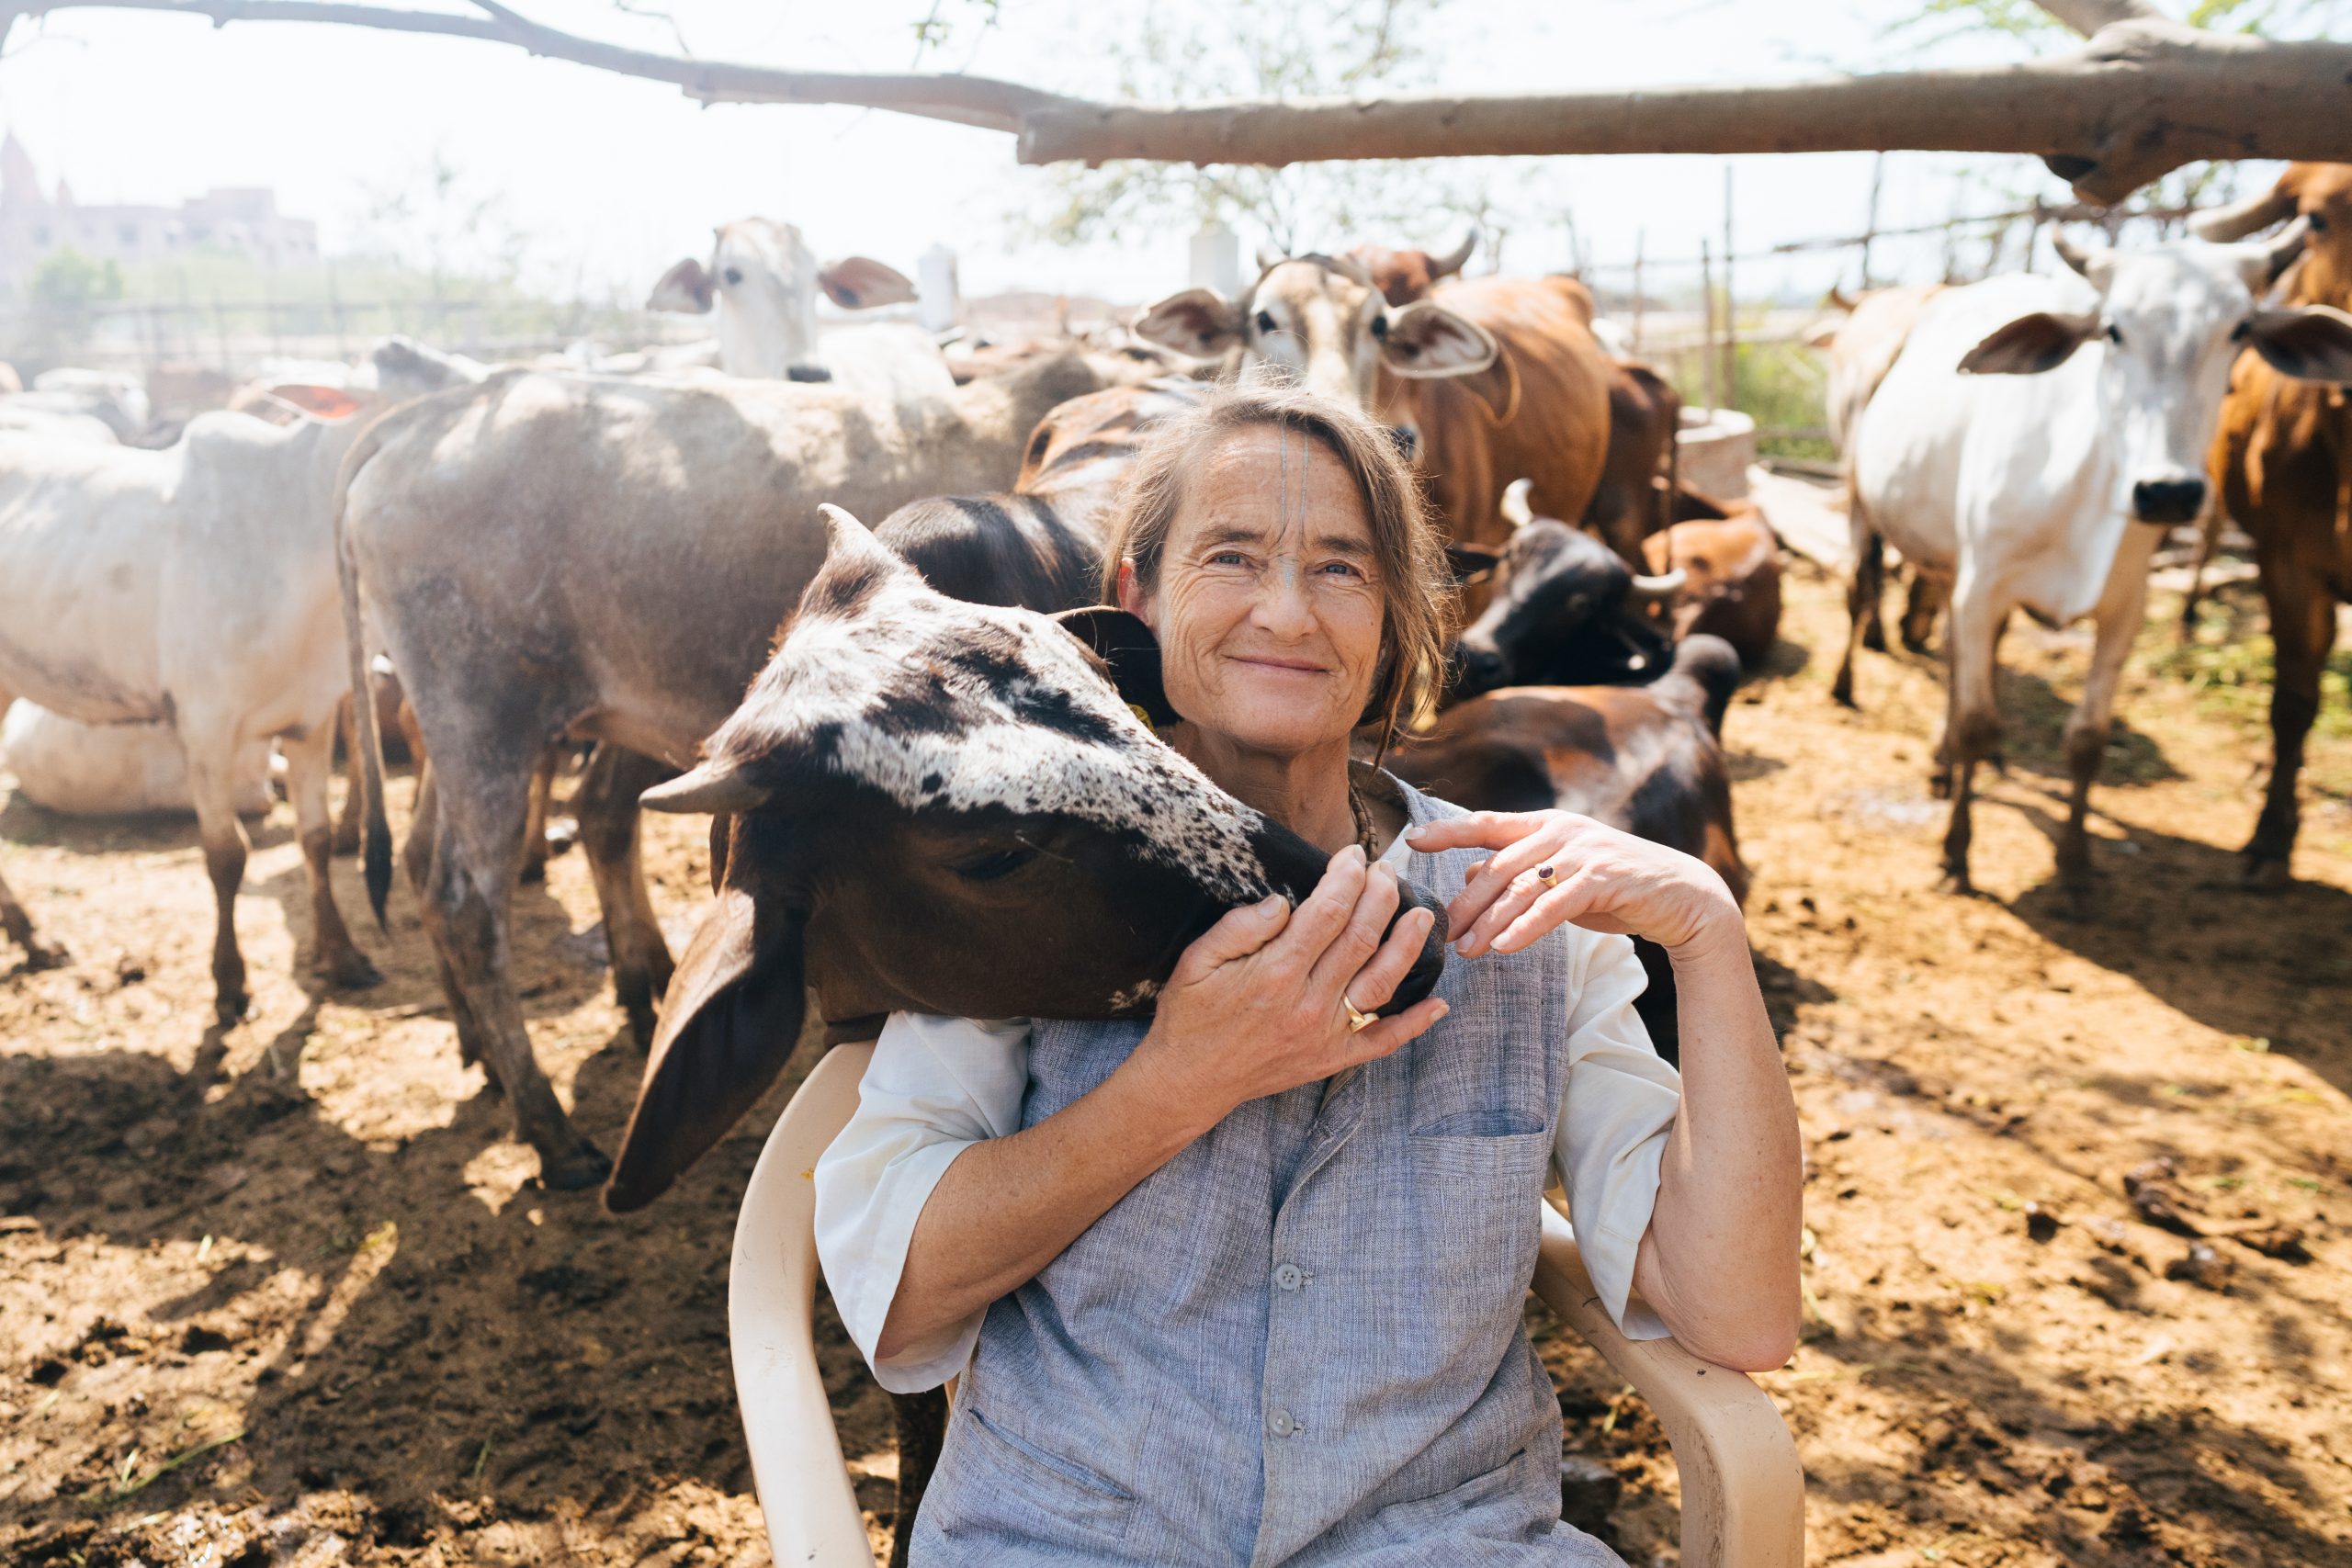 Donatekart Came To The Rescue Of German Lady Struggling To Feed Cows In Her Gaushala